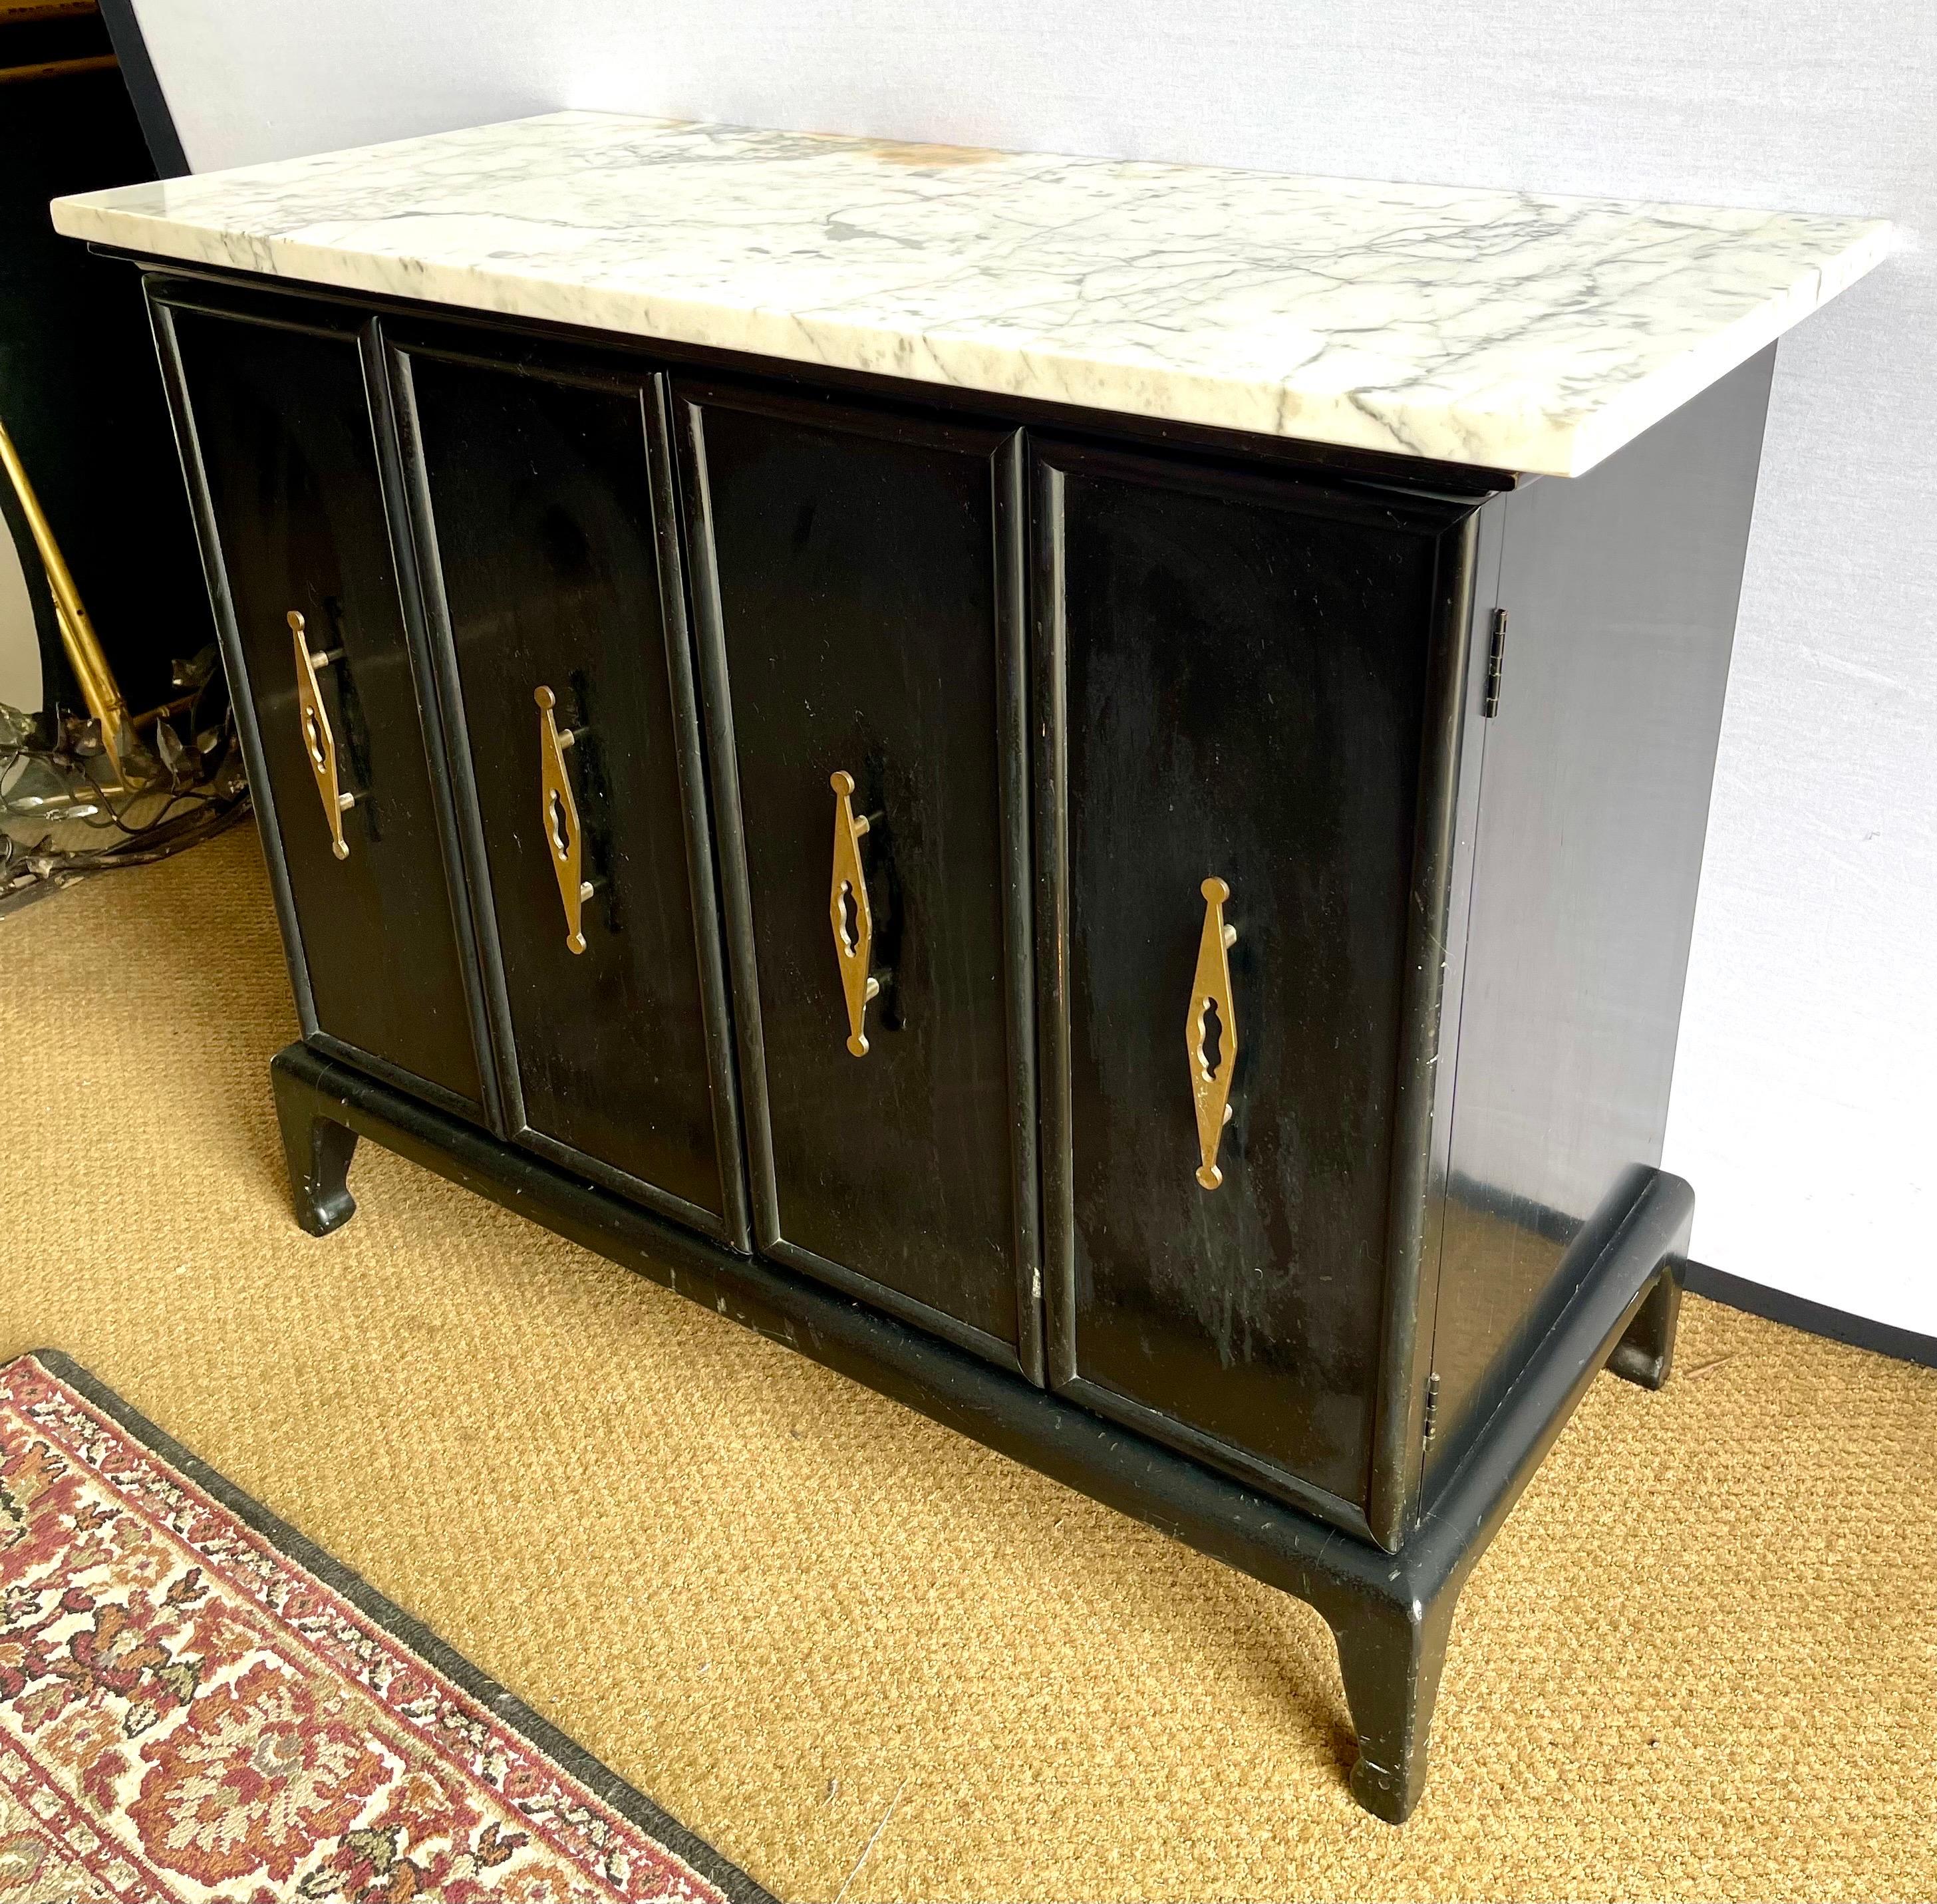 Mid century black lacquer cabinet with marble top has two front doors with sculptural brass diamond pulls. Use as a buffet, sideboard or bar to store your liquor. Good condition but does has stain on top a marble in one section which is detailed in